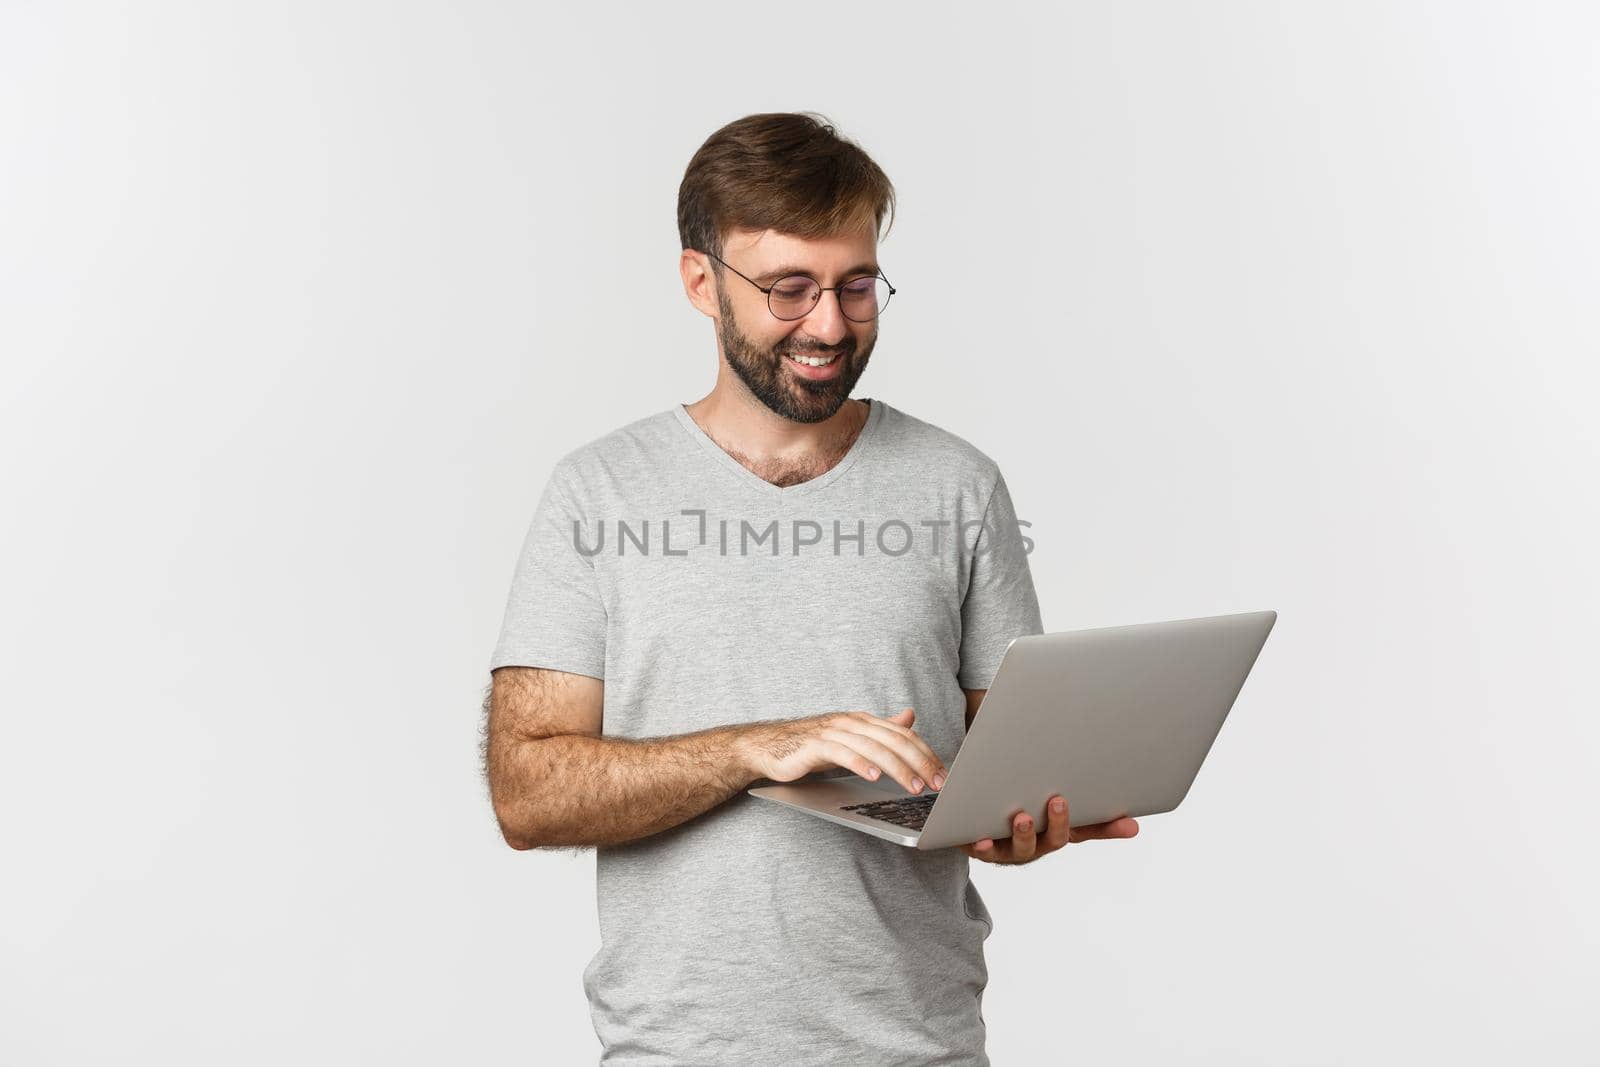 Handsome man freelancer, working with laptop and smiling, wearing glasses and t-shirt, standing over white background.